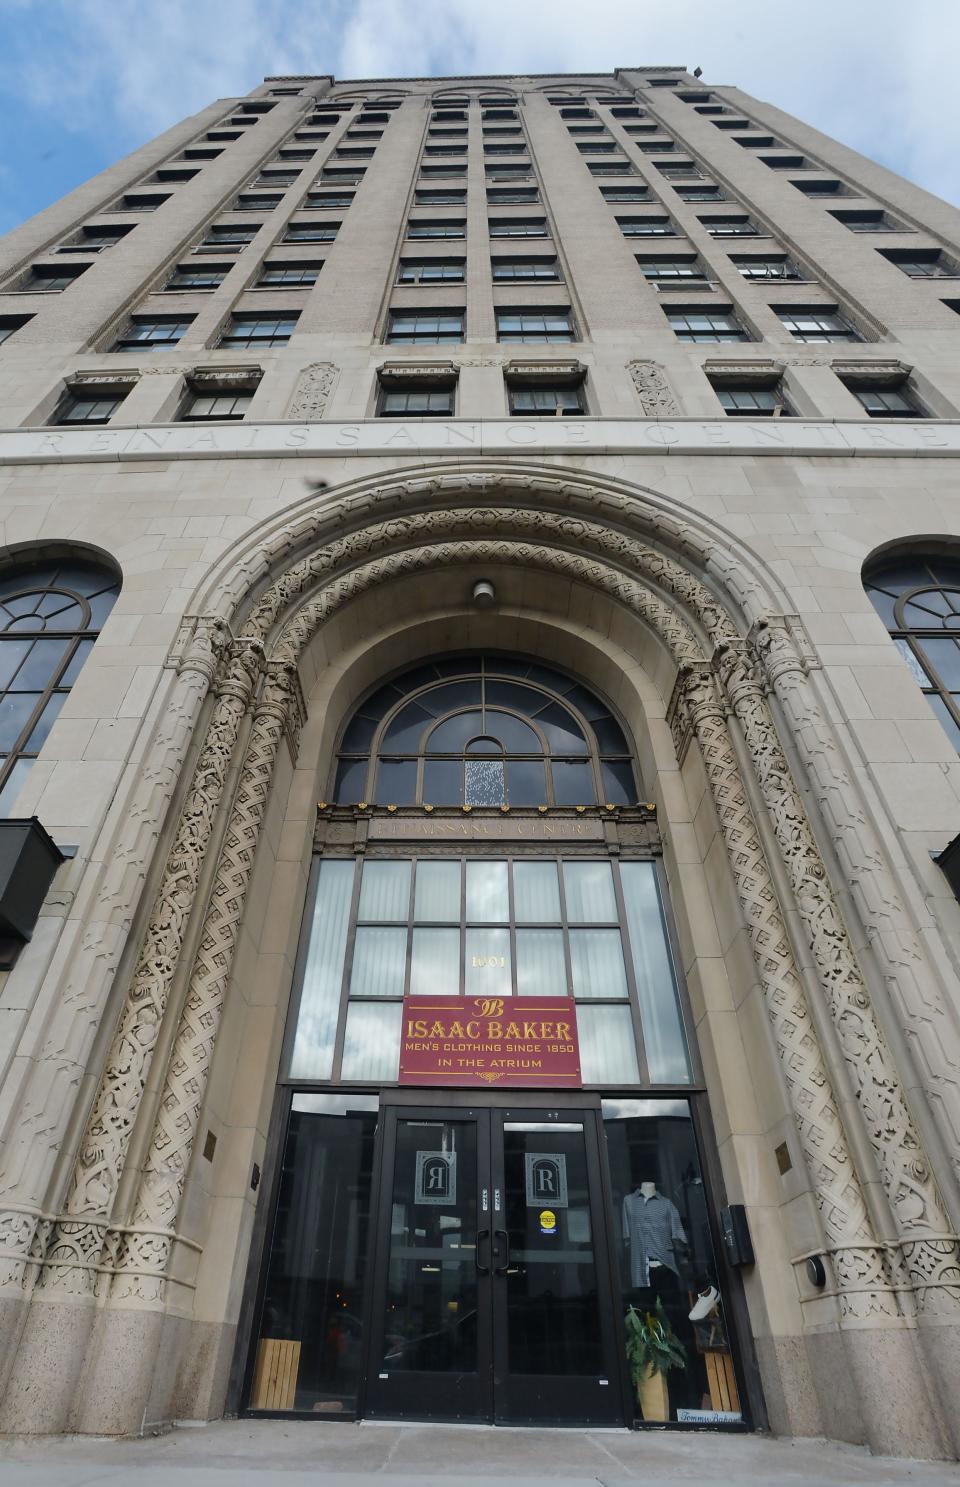 Christian Siembieda, a California-based investor, plans to remake Erie's tallest building into an upscale 150-room hotel as well as space for restaurants, offices and public gathering space.